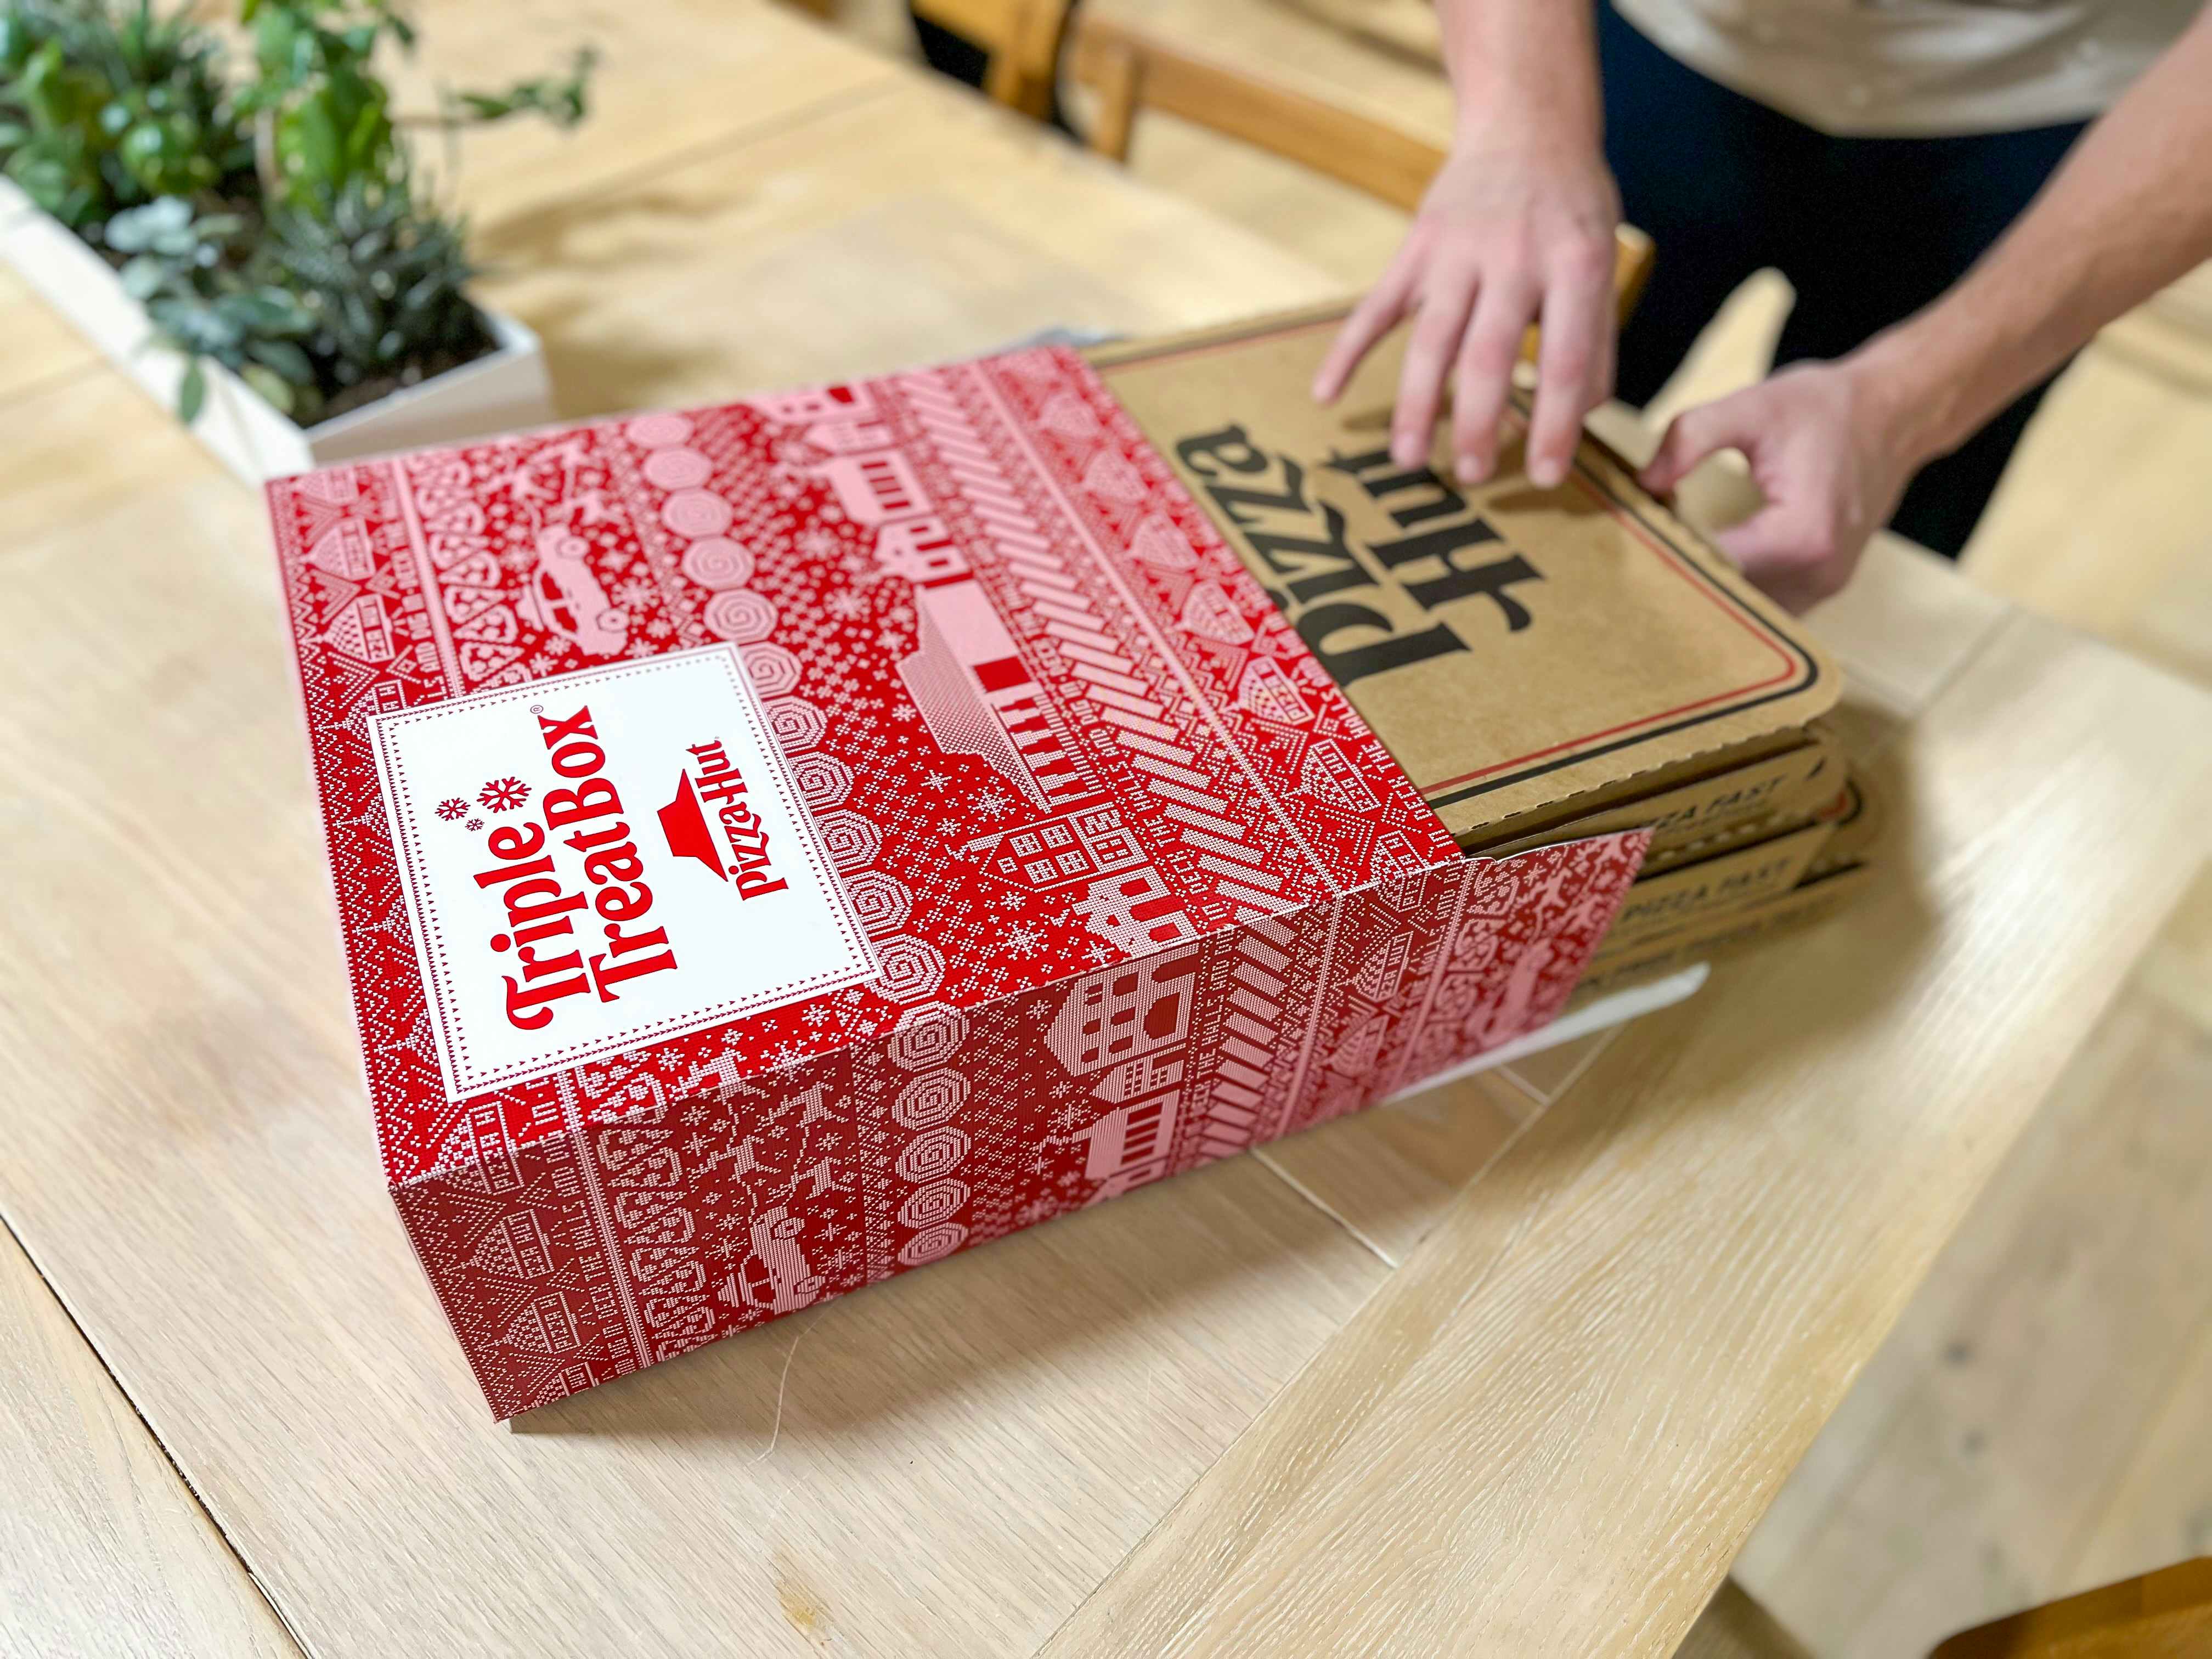 The Big Dinner Box From Pizza Hut Returns Just in Time For Back-To